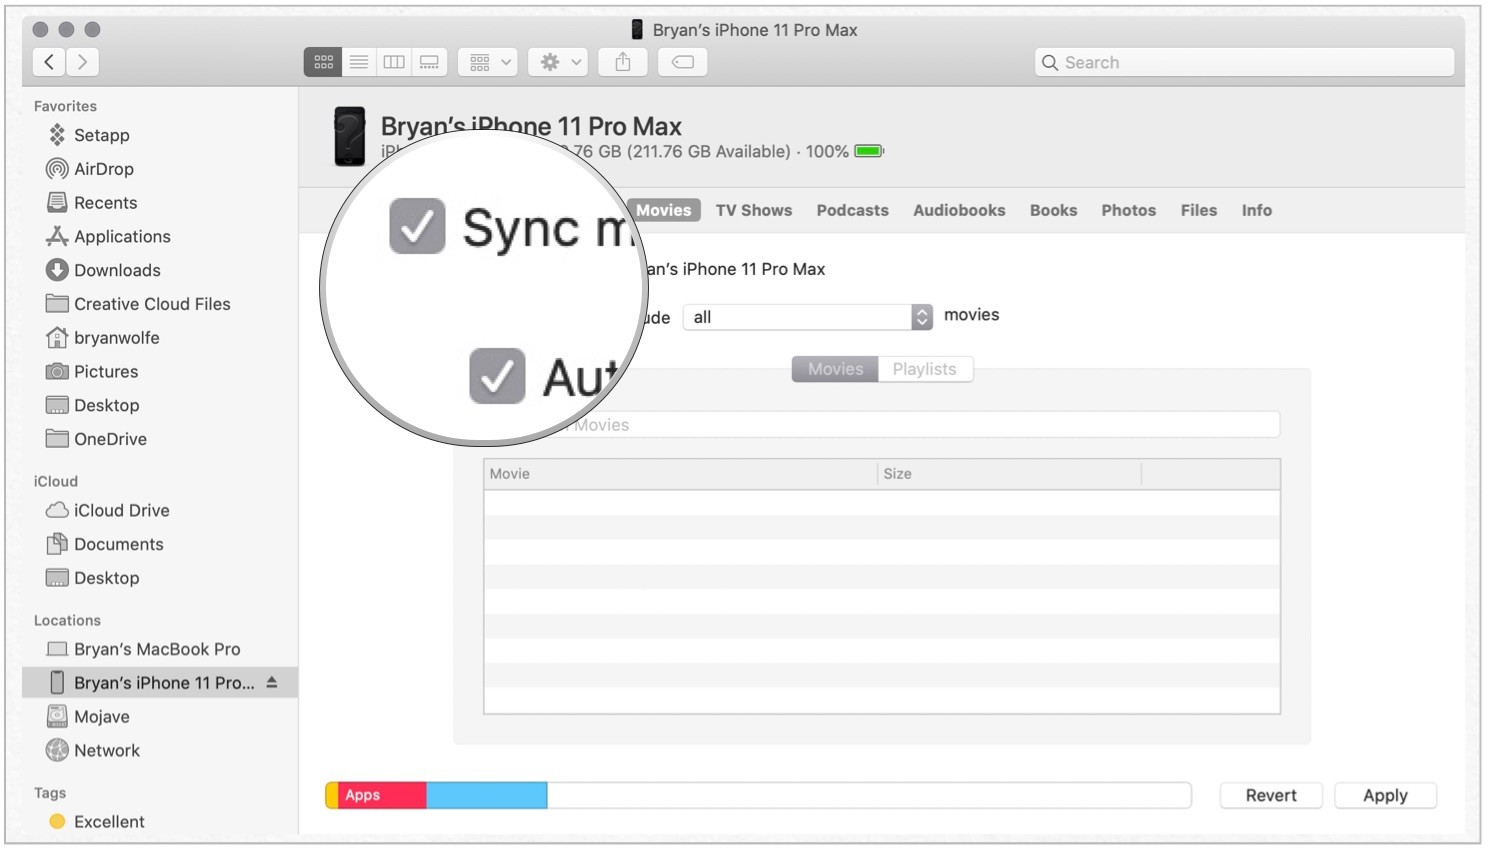 itunes for mac: sync and organize ios apps 2017